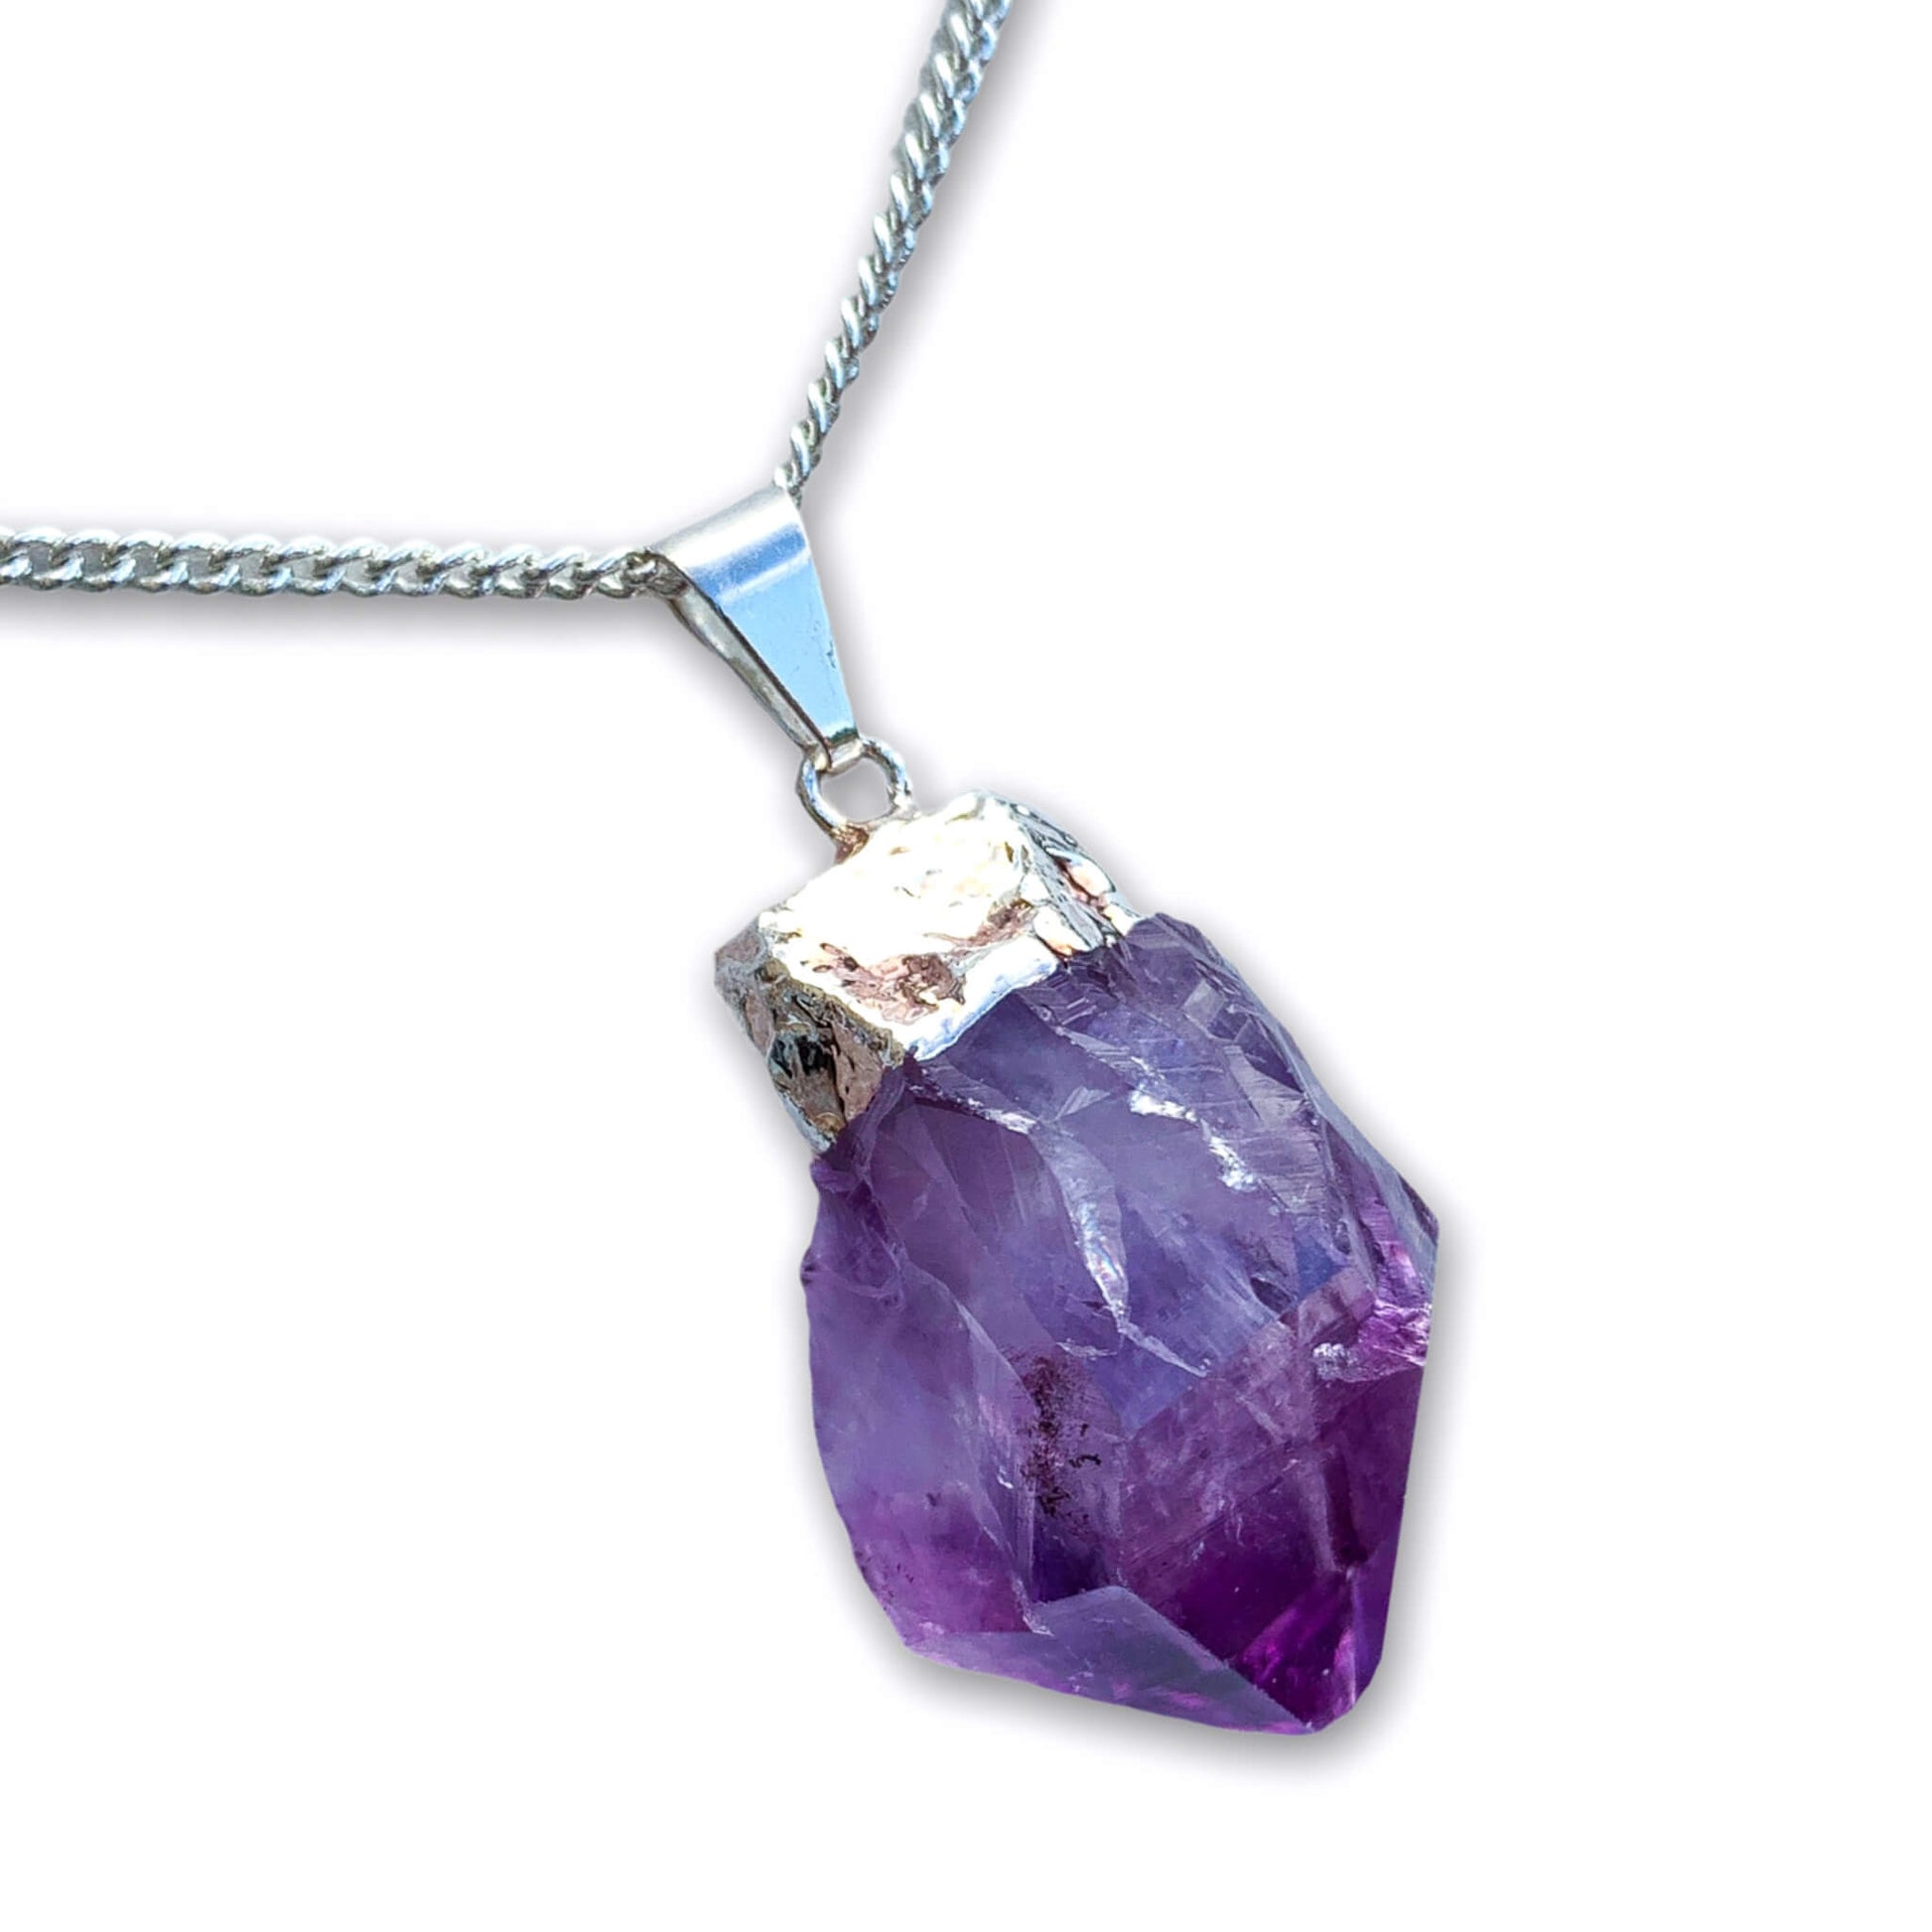 Raw Amethyst Pendant Amethyst necklace Healing - Magic Crystals - Stone Necklace